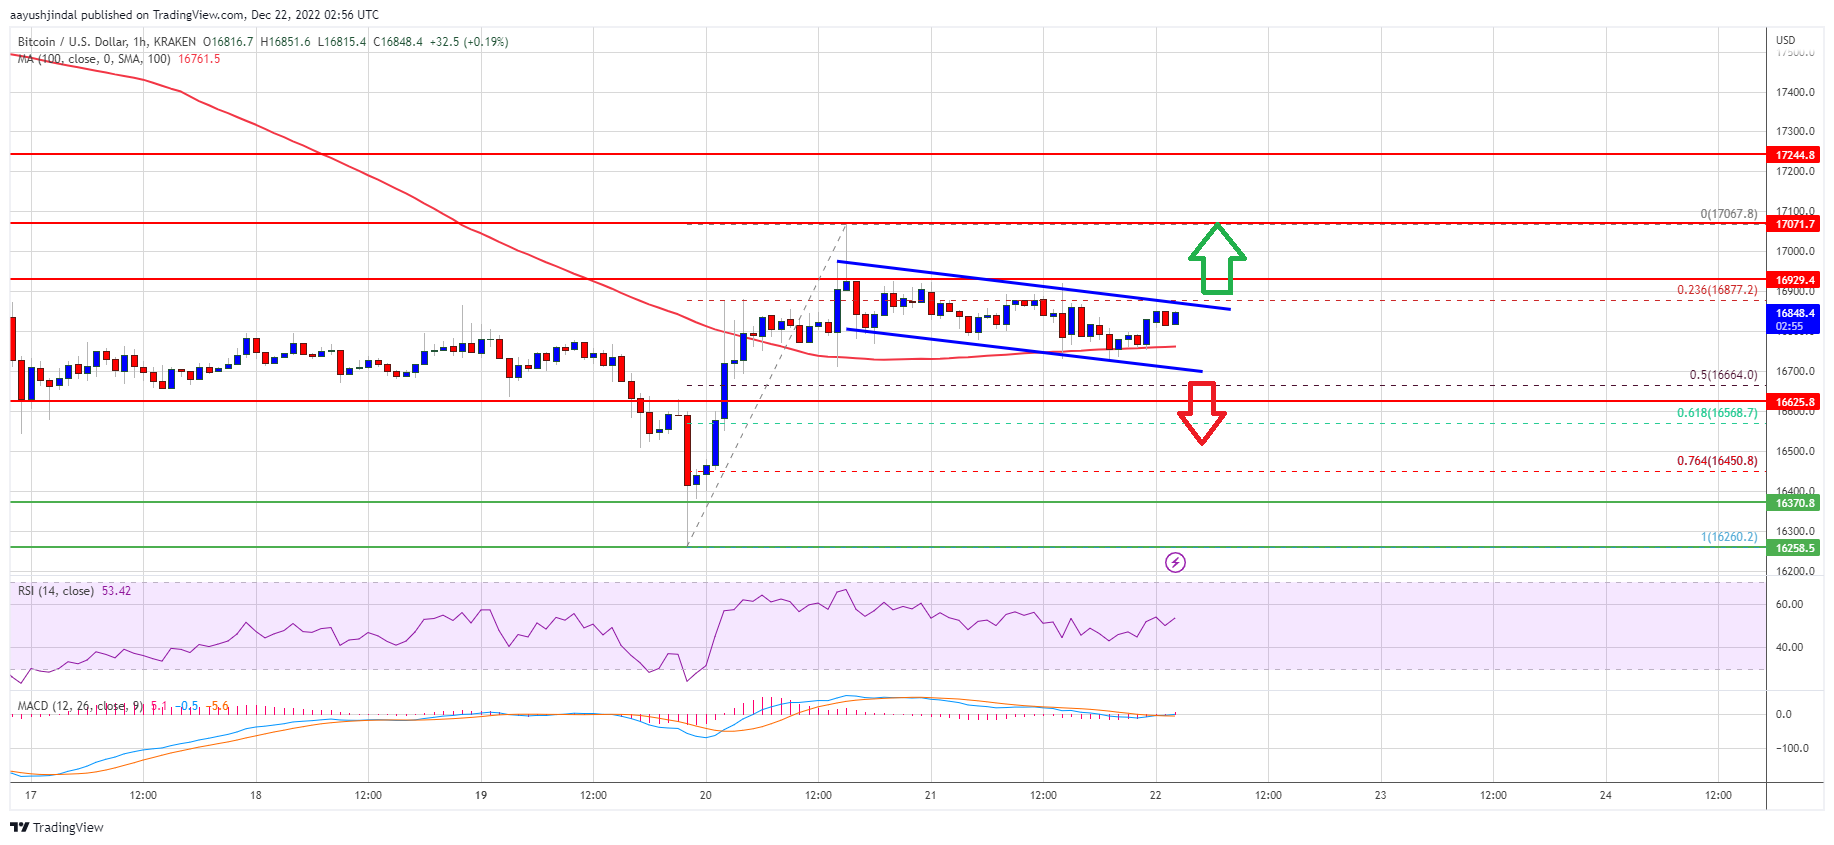 Bitcoin Price Recovery Could Soon Fade If BTC Fails To Surpass $17.2K